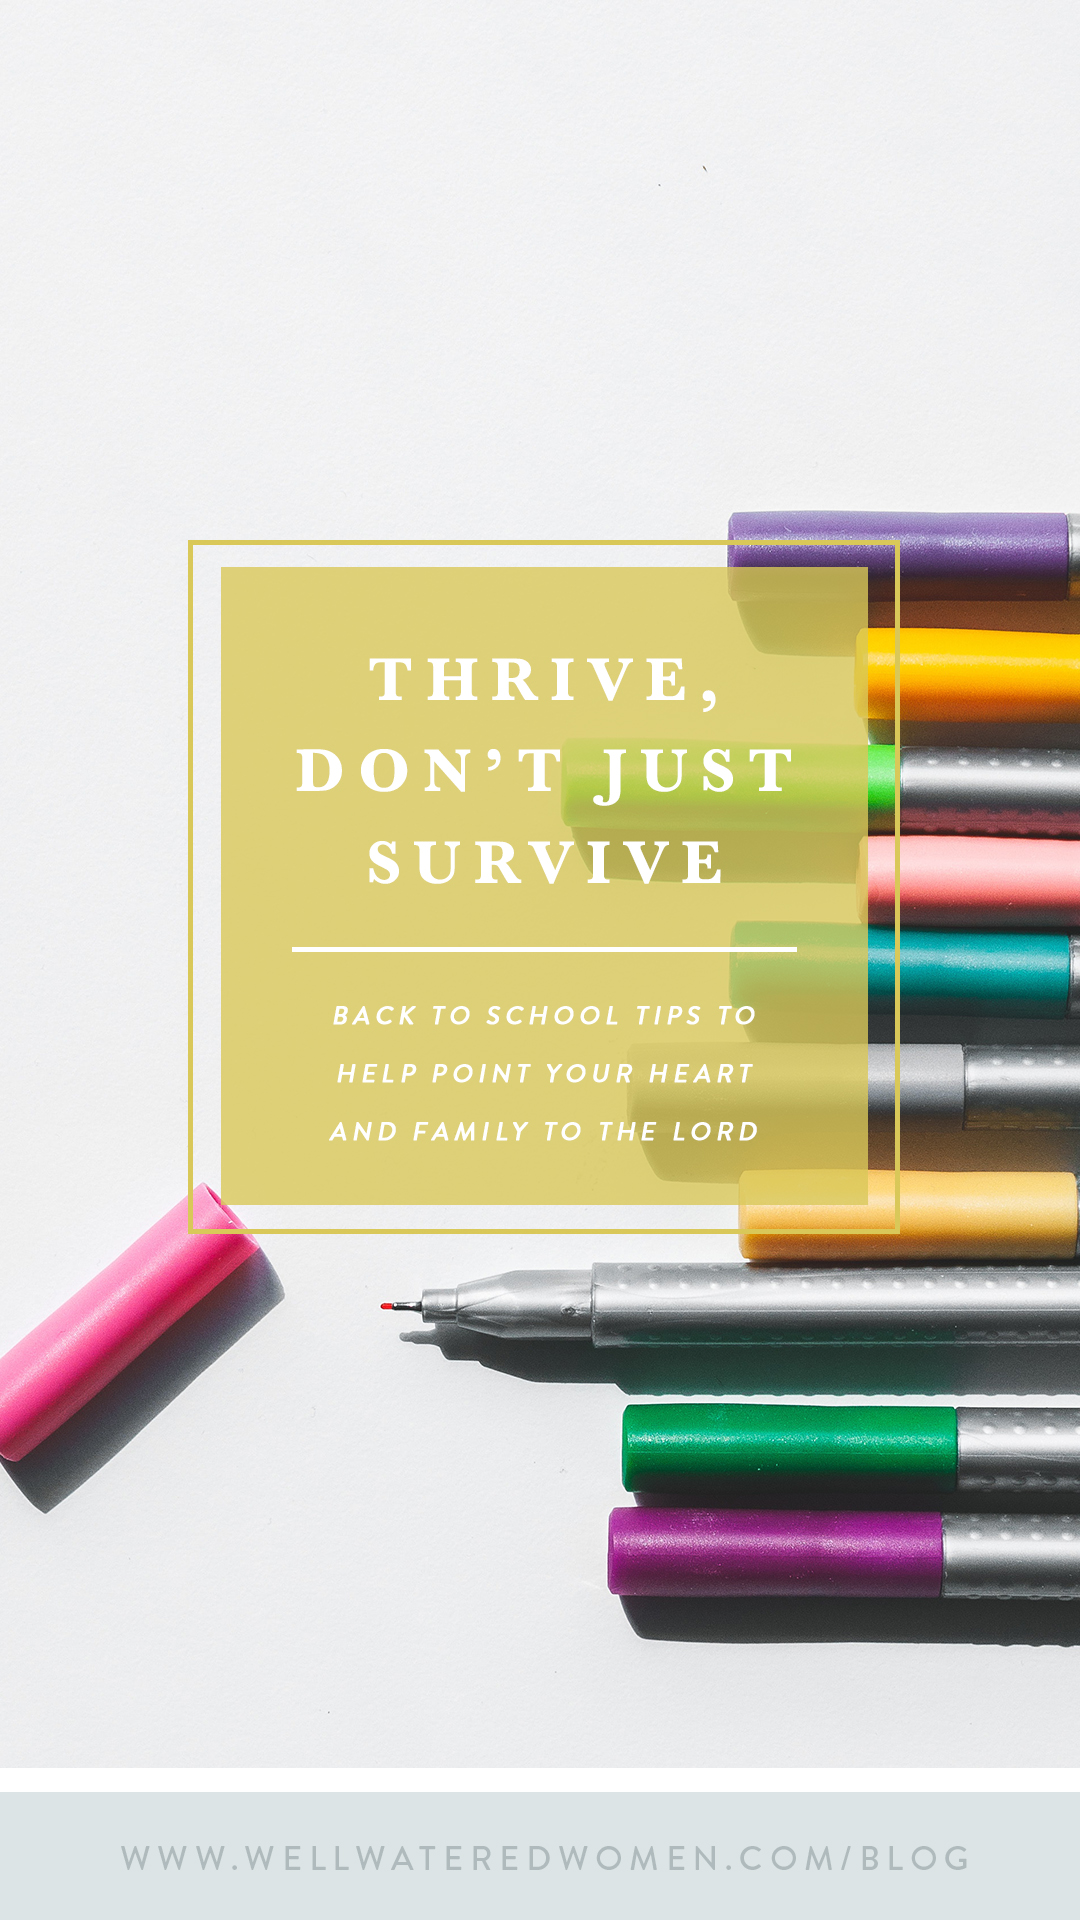 How to Flourish This Fall: Practical tips for thriving, not surviving as a Christian Woman (Back to school tips for your family!)